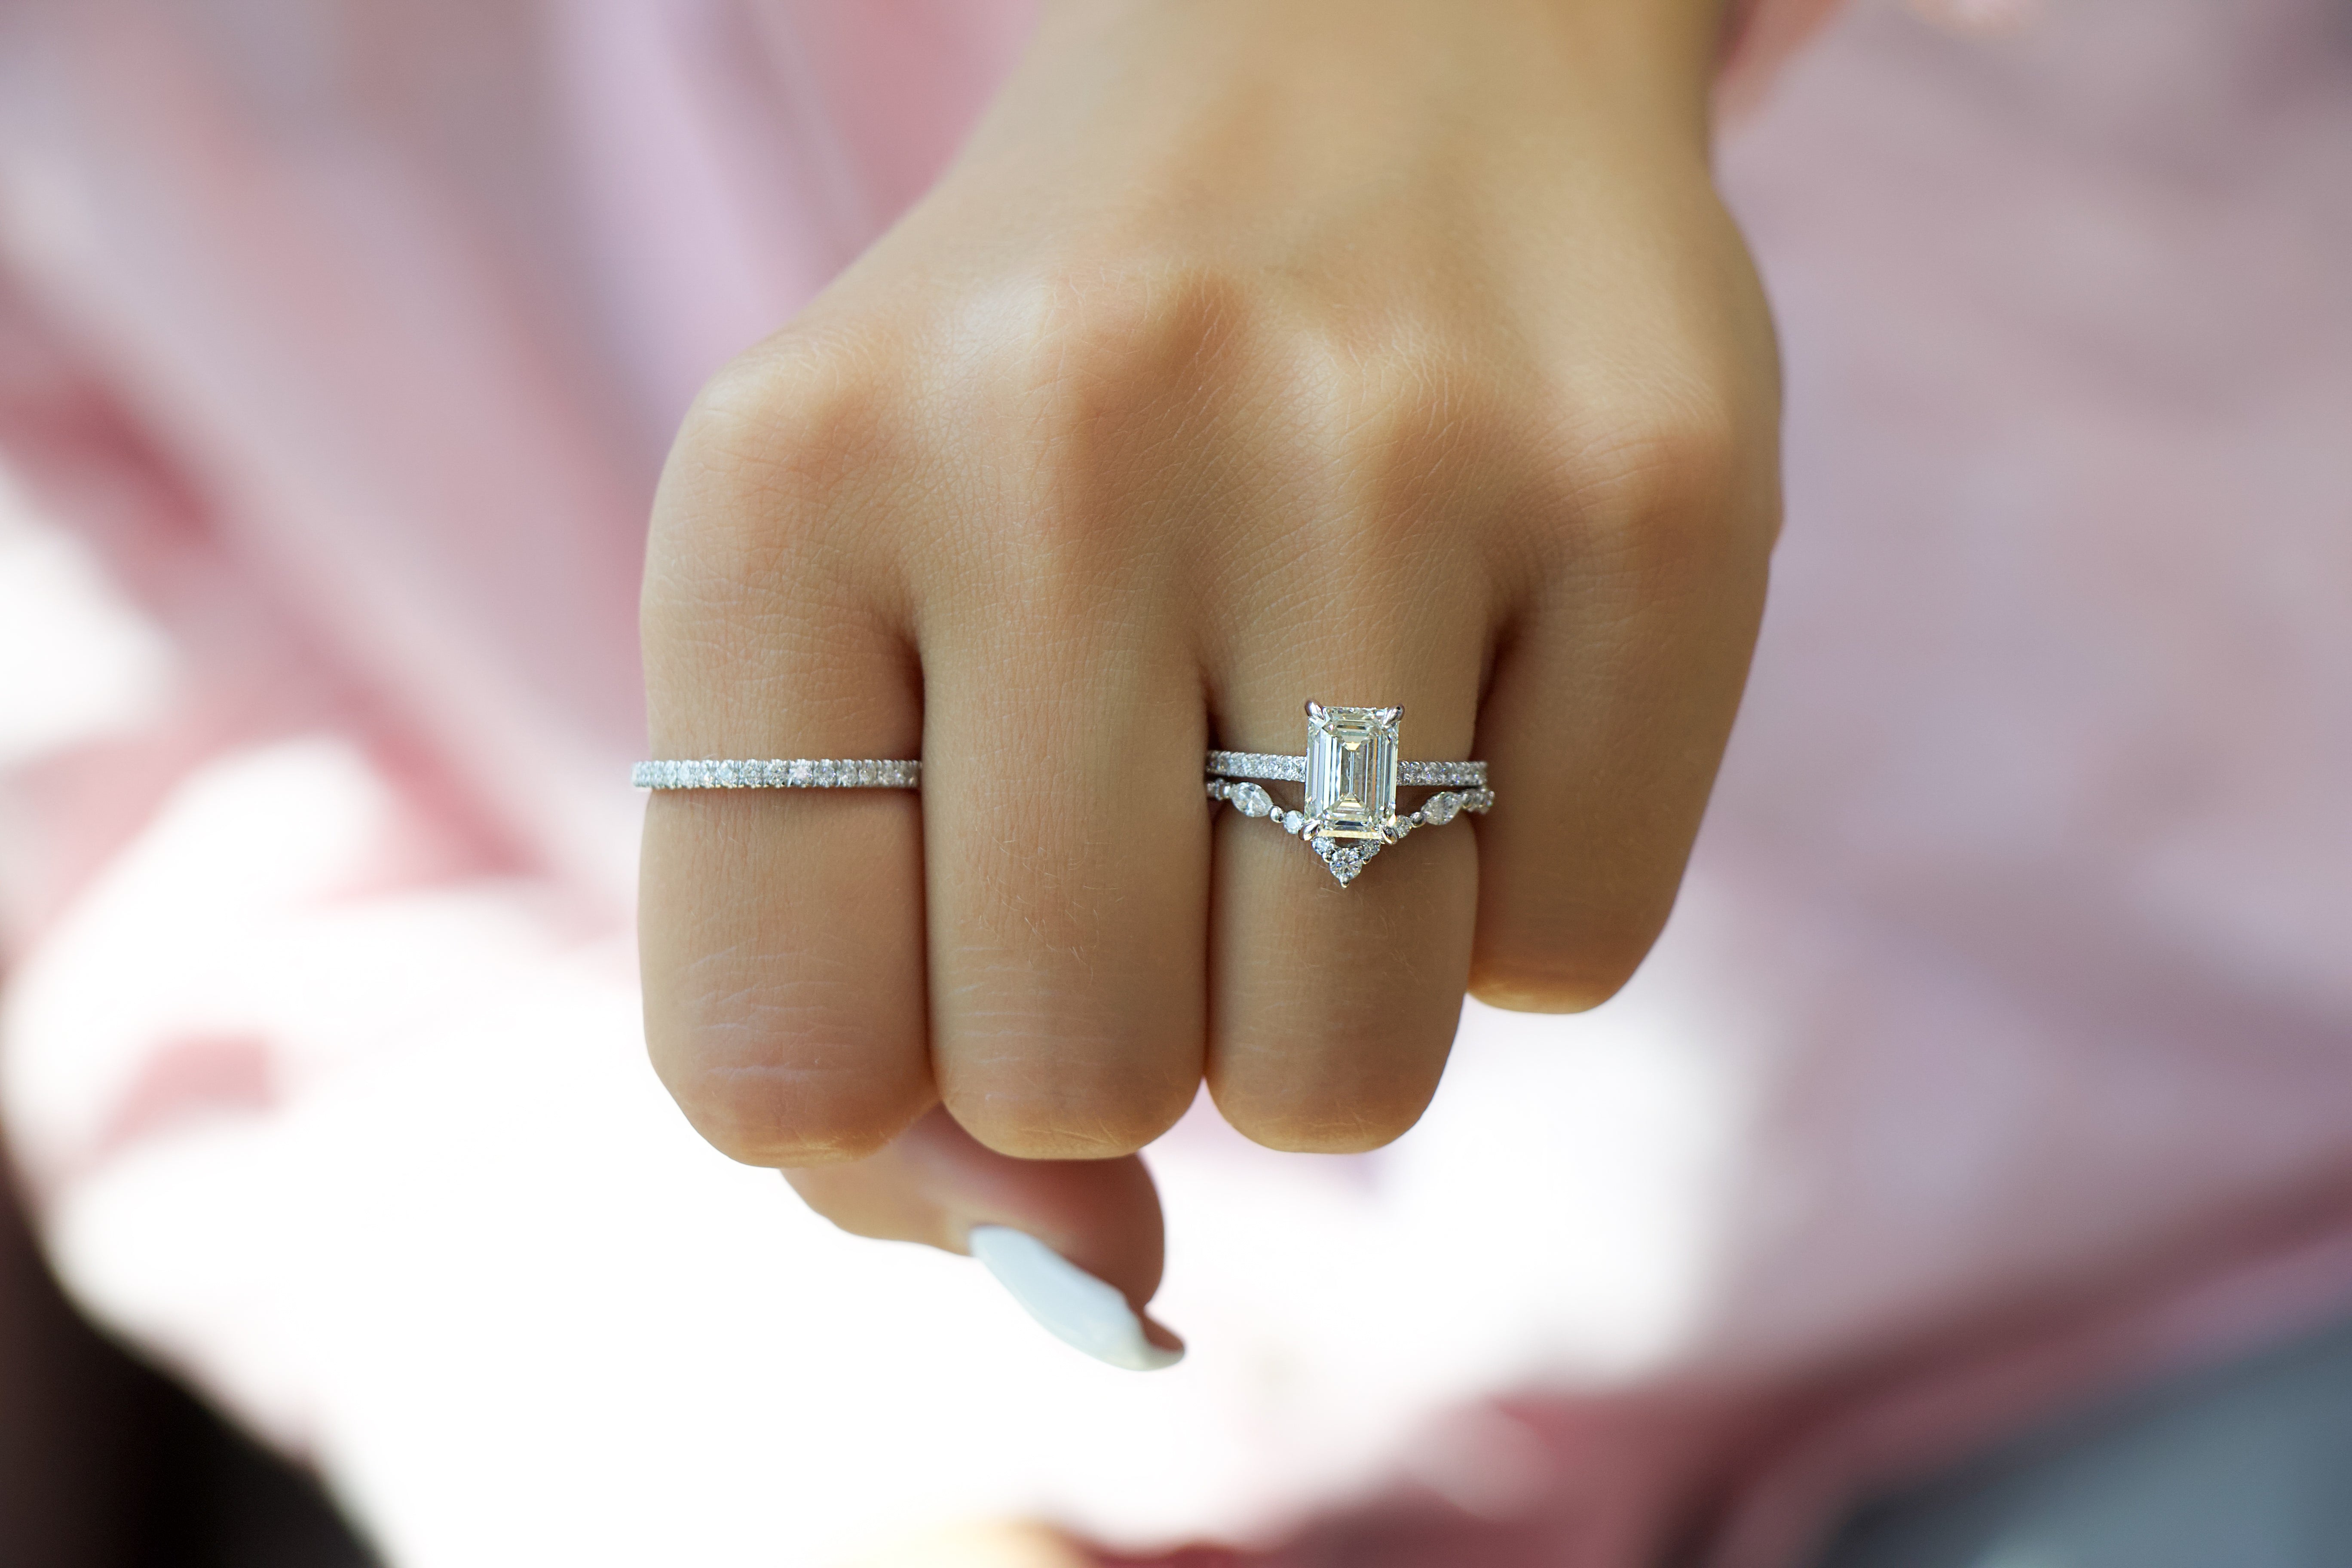 How to Choose a Wedding Band for Your Engagement Ring